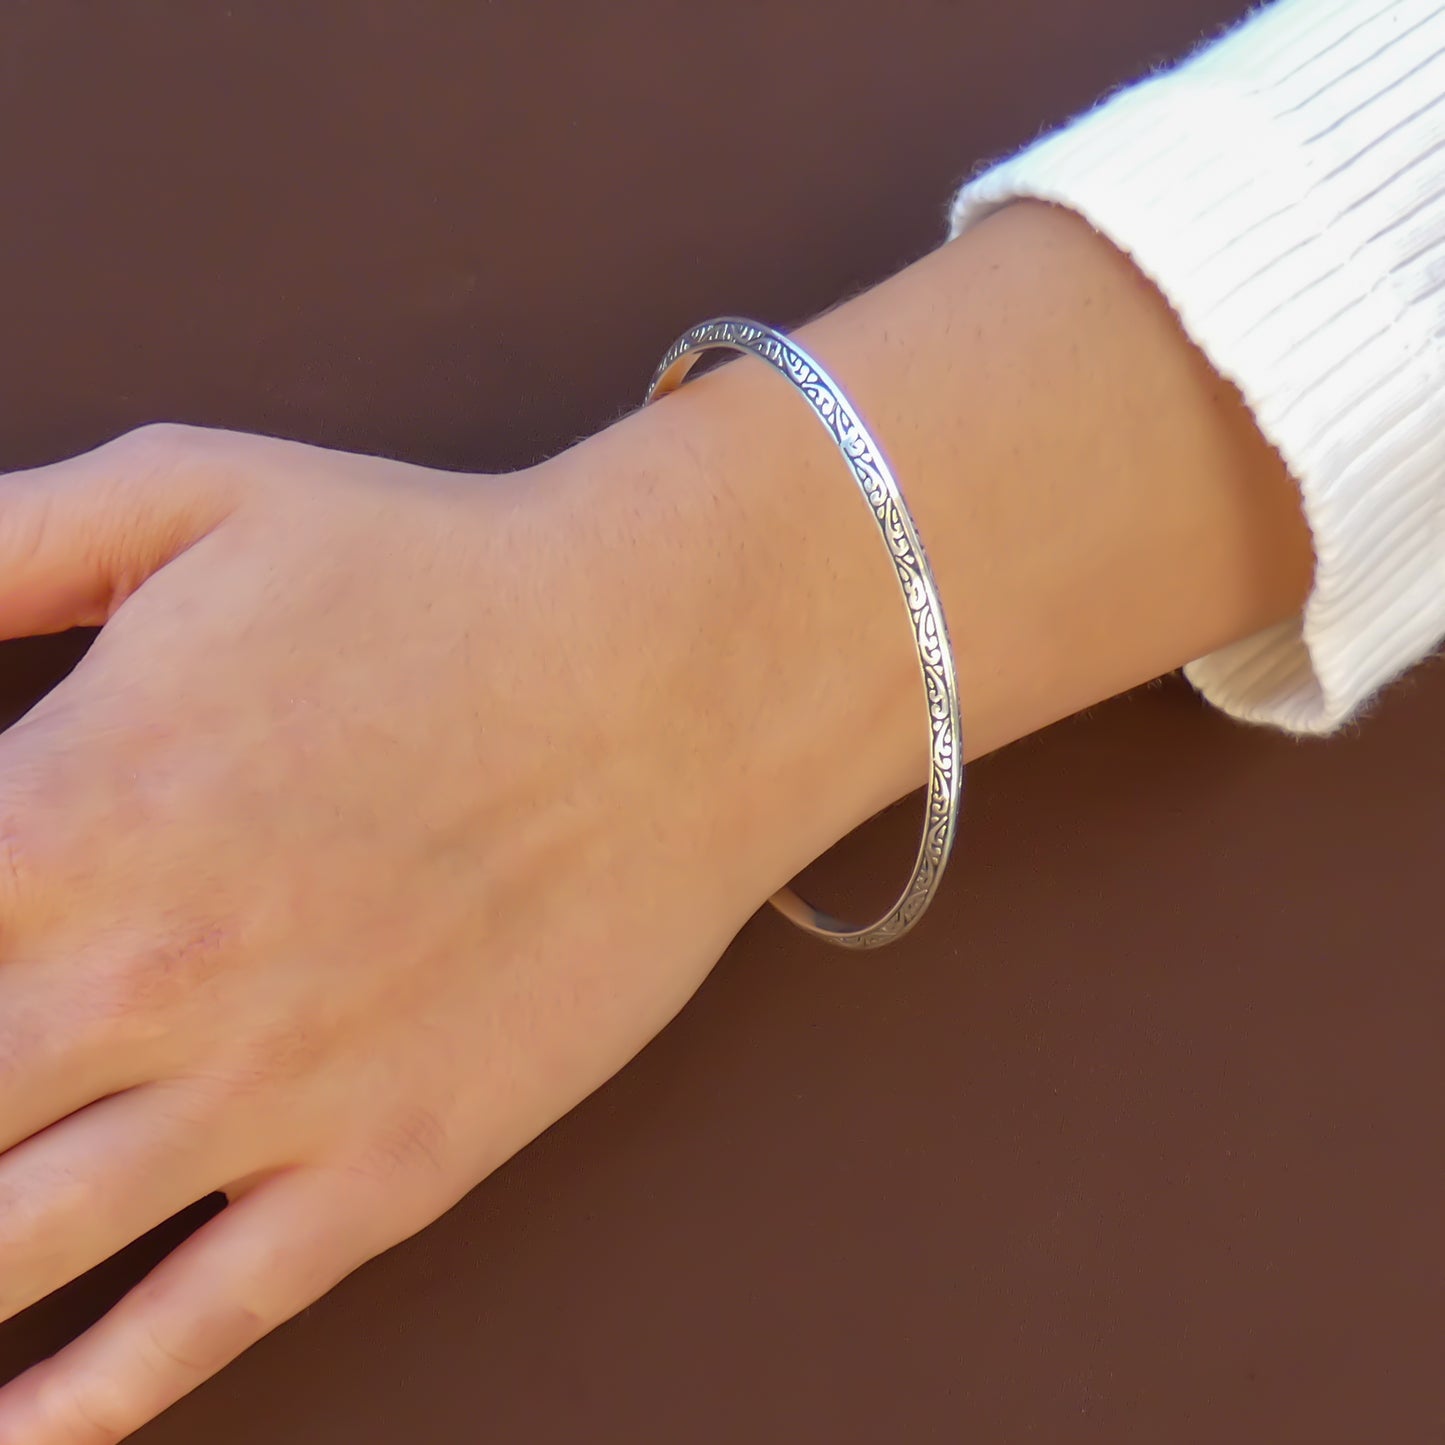 Woman wearing a silver bangle bracelet with carved filigree designs.